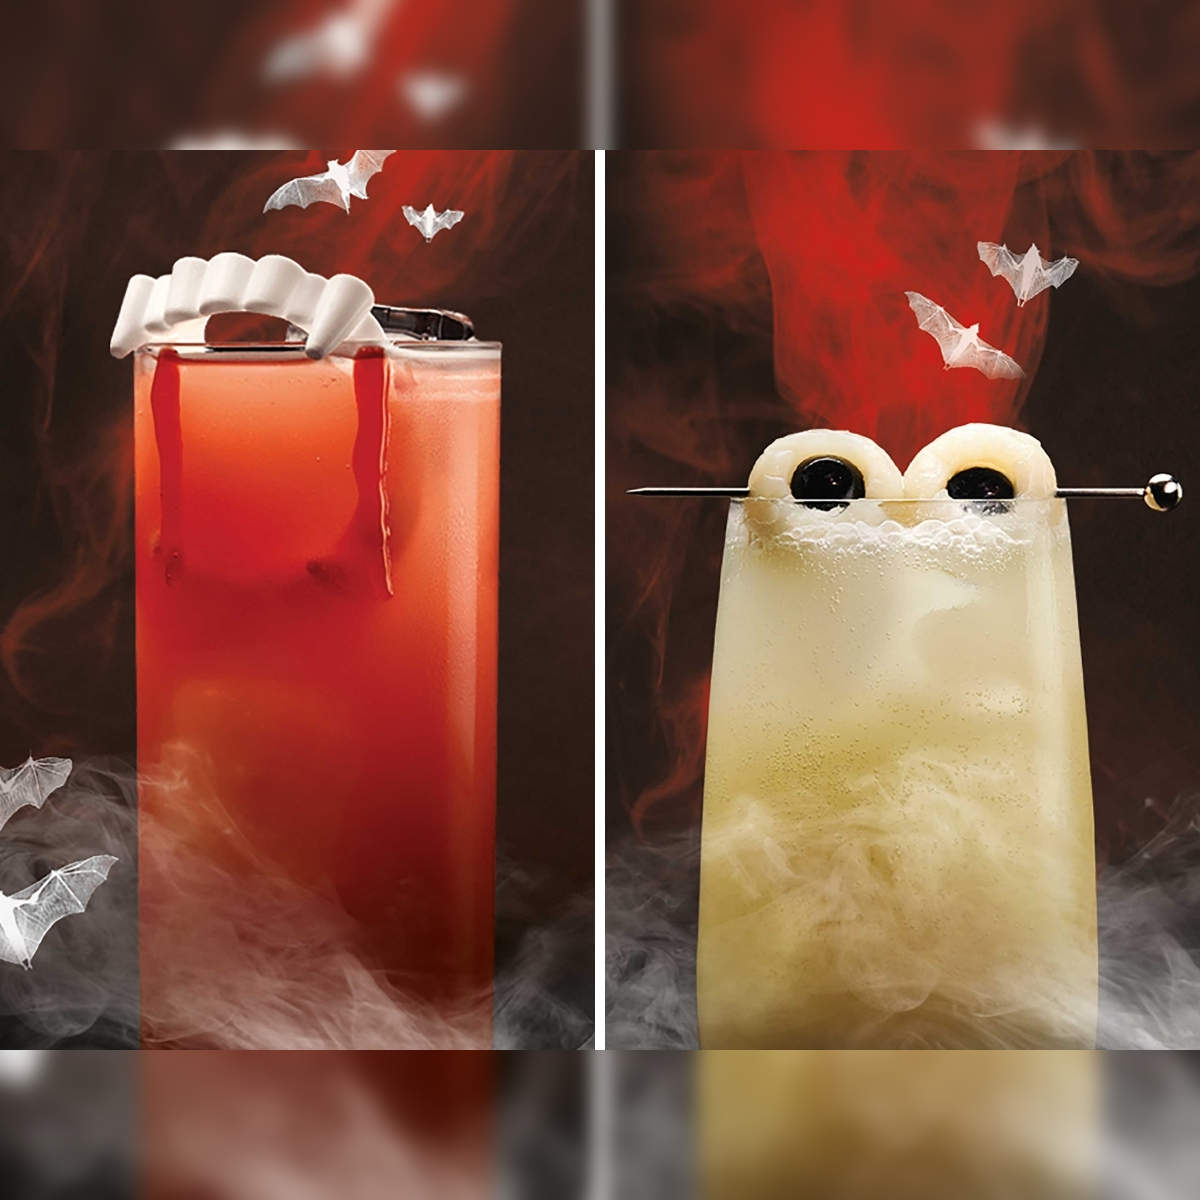 Friday The 13th Cocktails: Spooky & Tasty Drinks To Keep You Warm